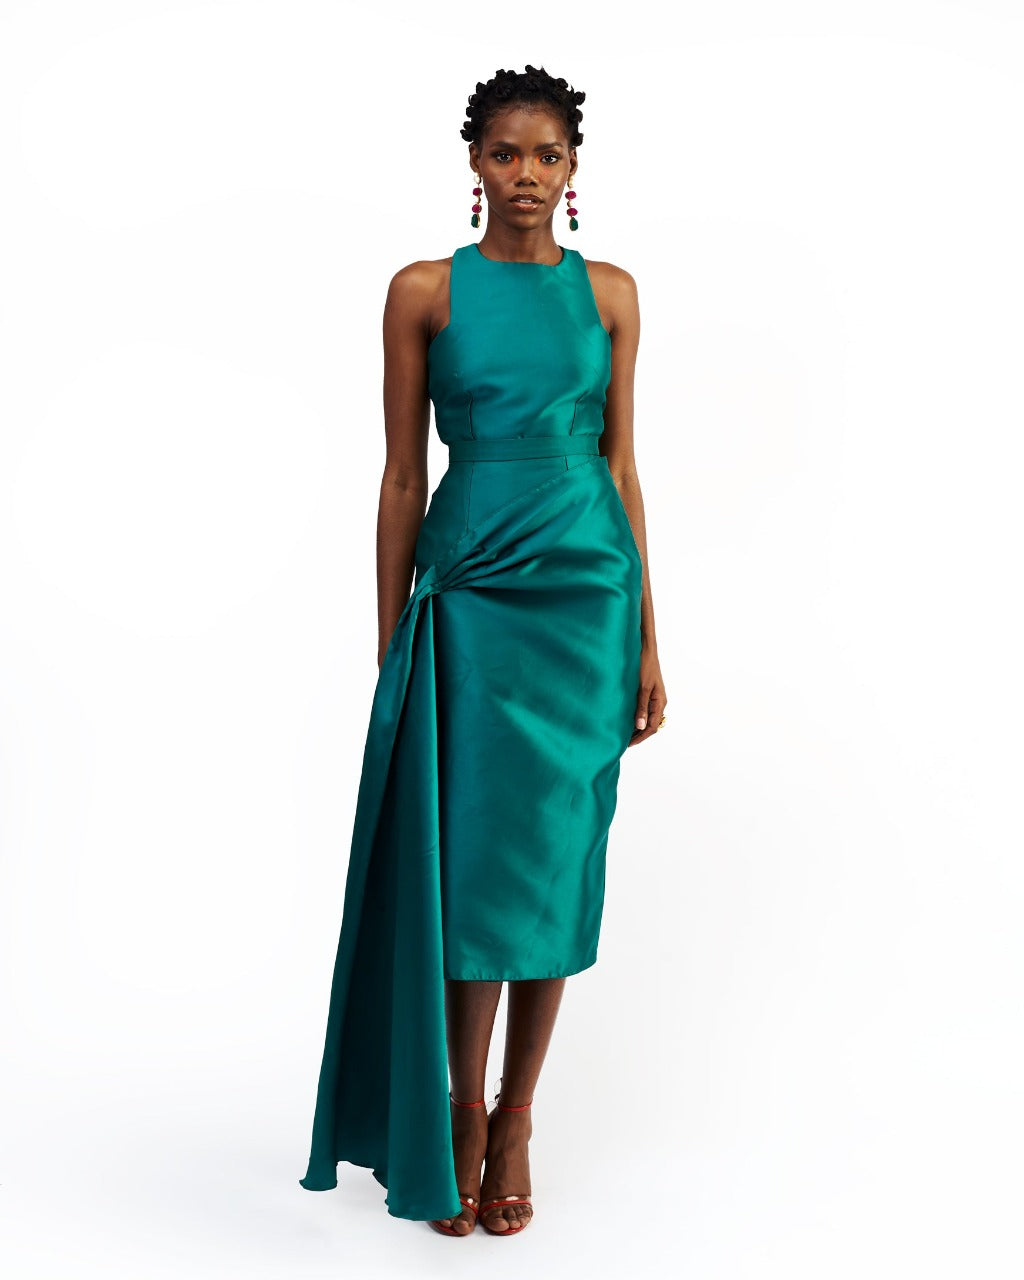 A model wearing a green silk satin top and skirt